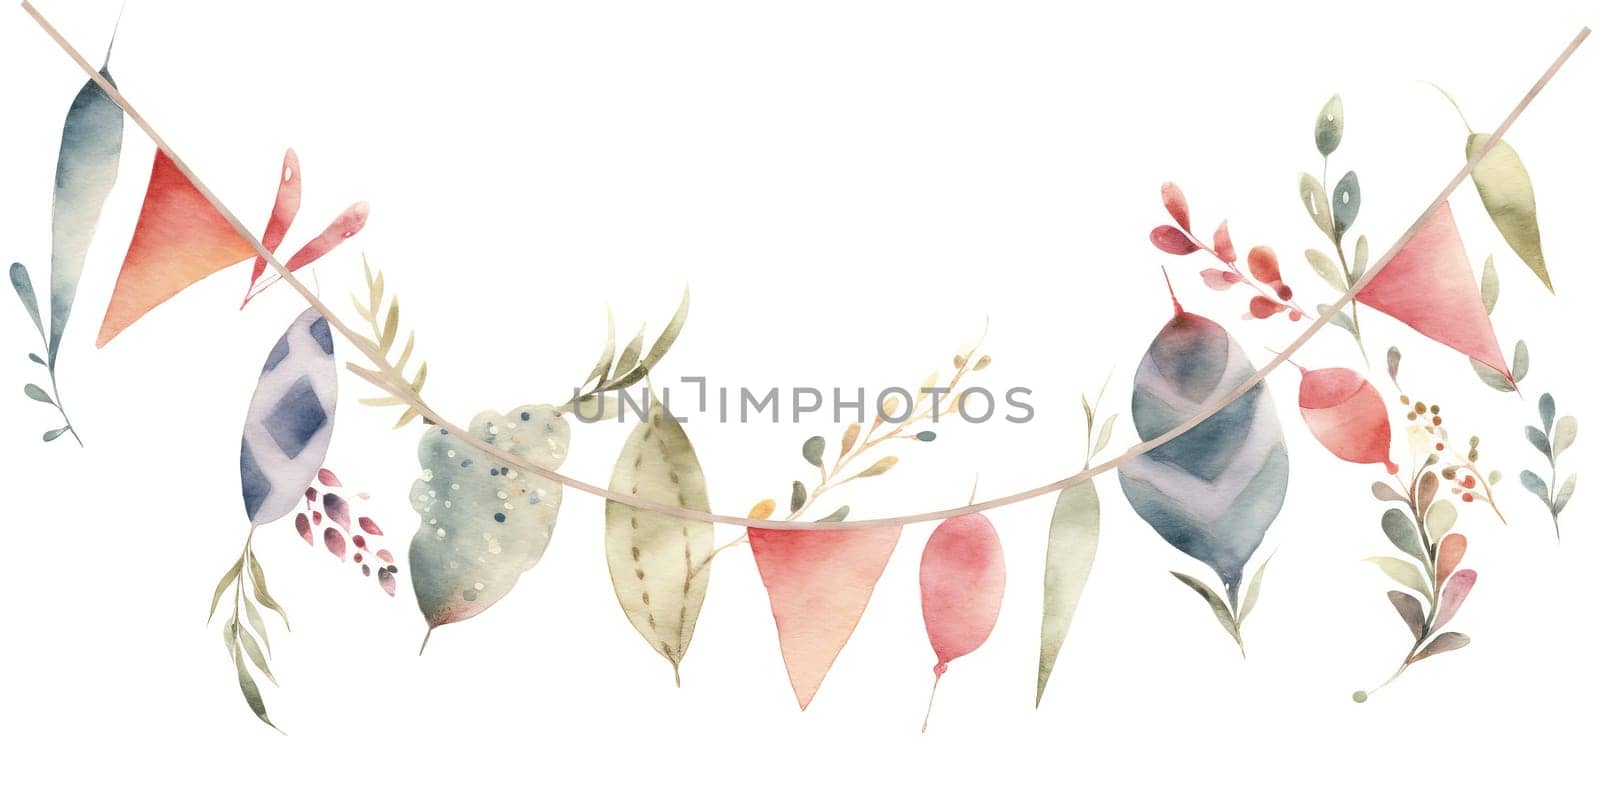 Watercolor Illustration Of Colorful Paper Garlands On A Rope by GekaSkr